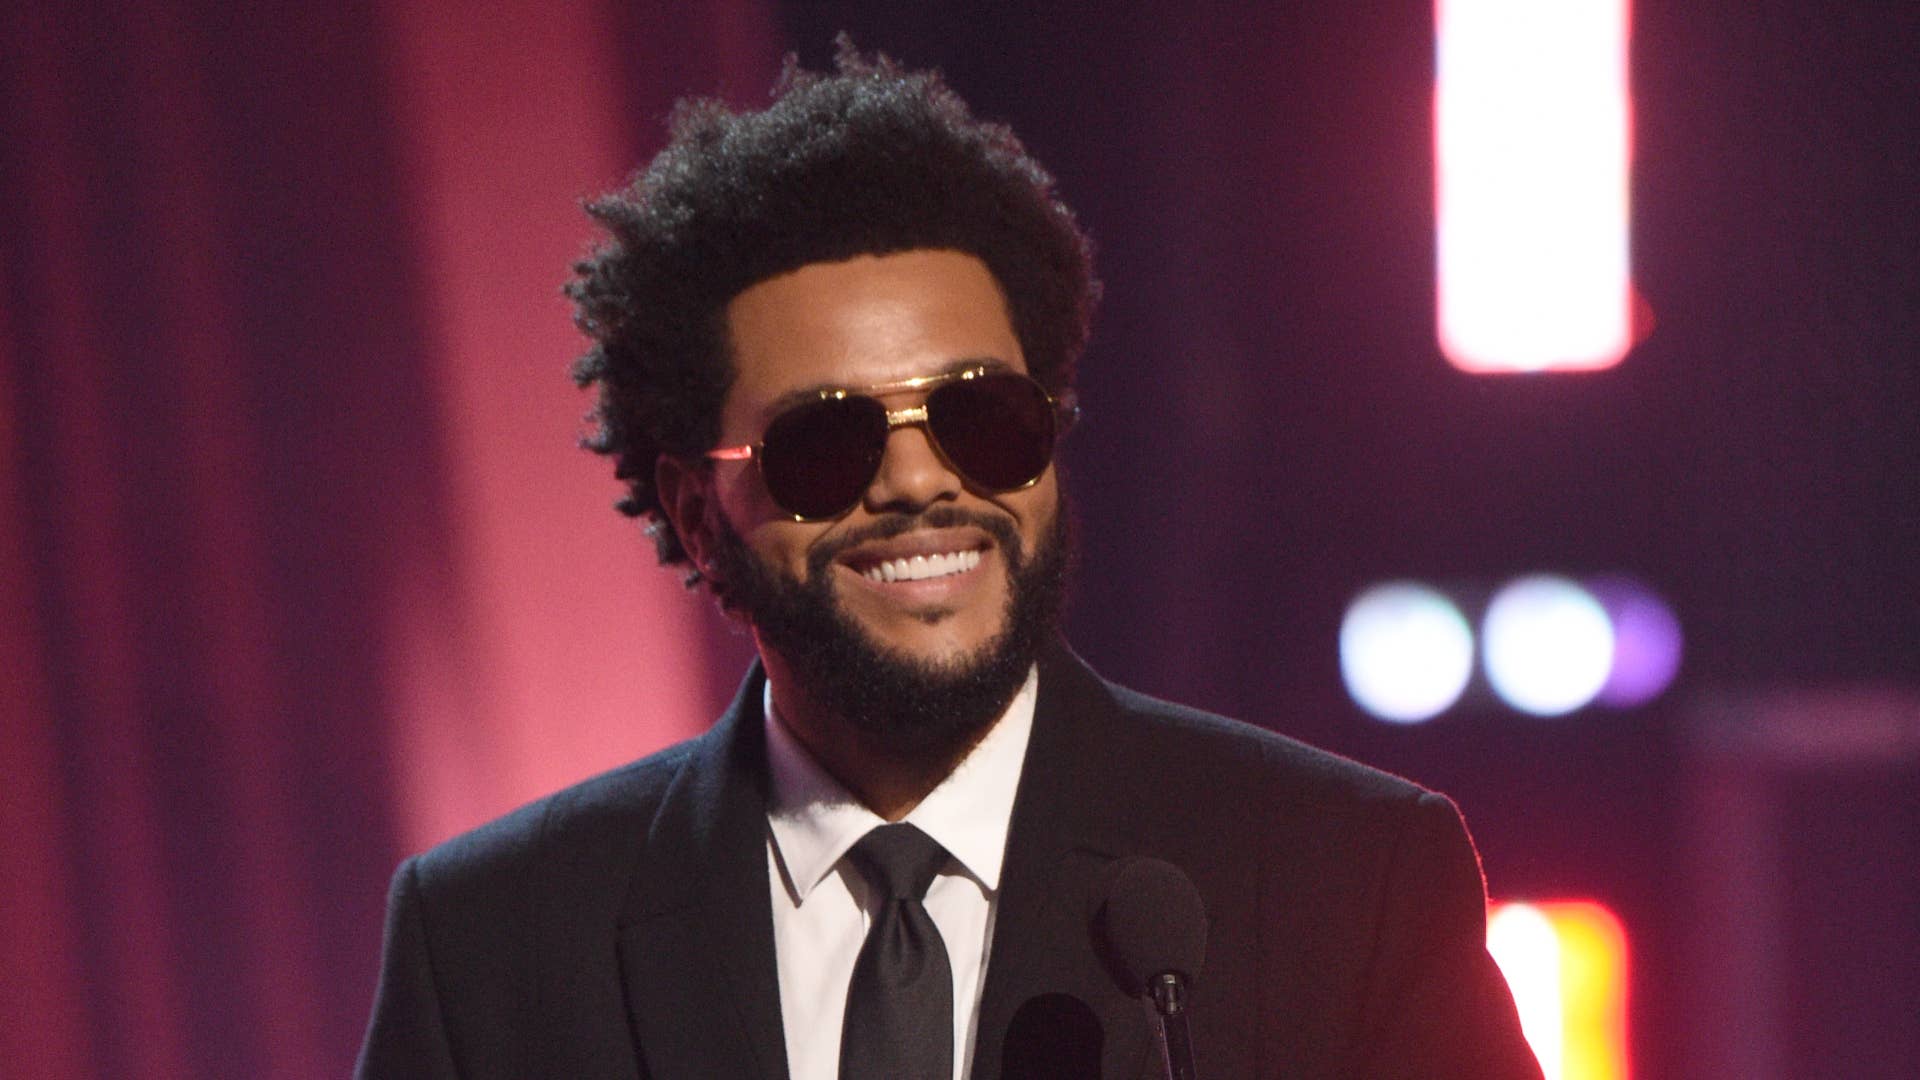 The Weeknd accepts the Male Artist of the Year onstage at the 2021 iHeartRadio Music Awards.